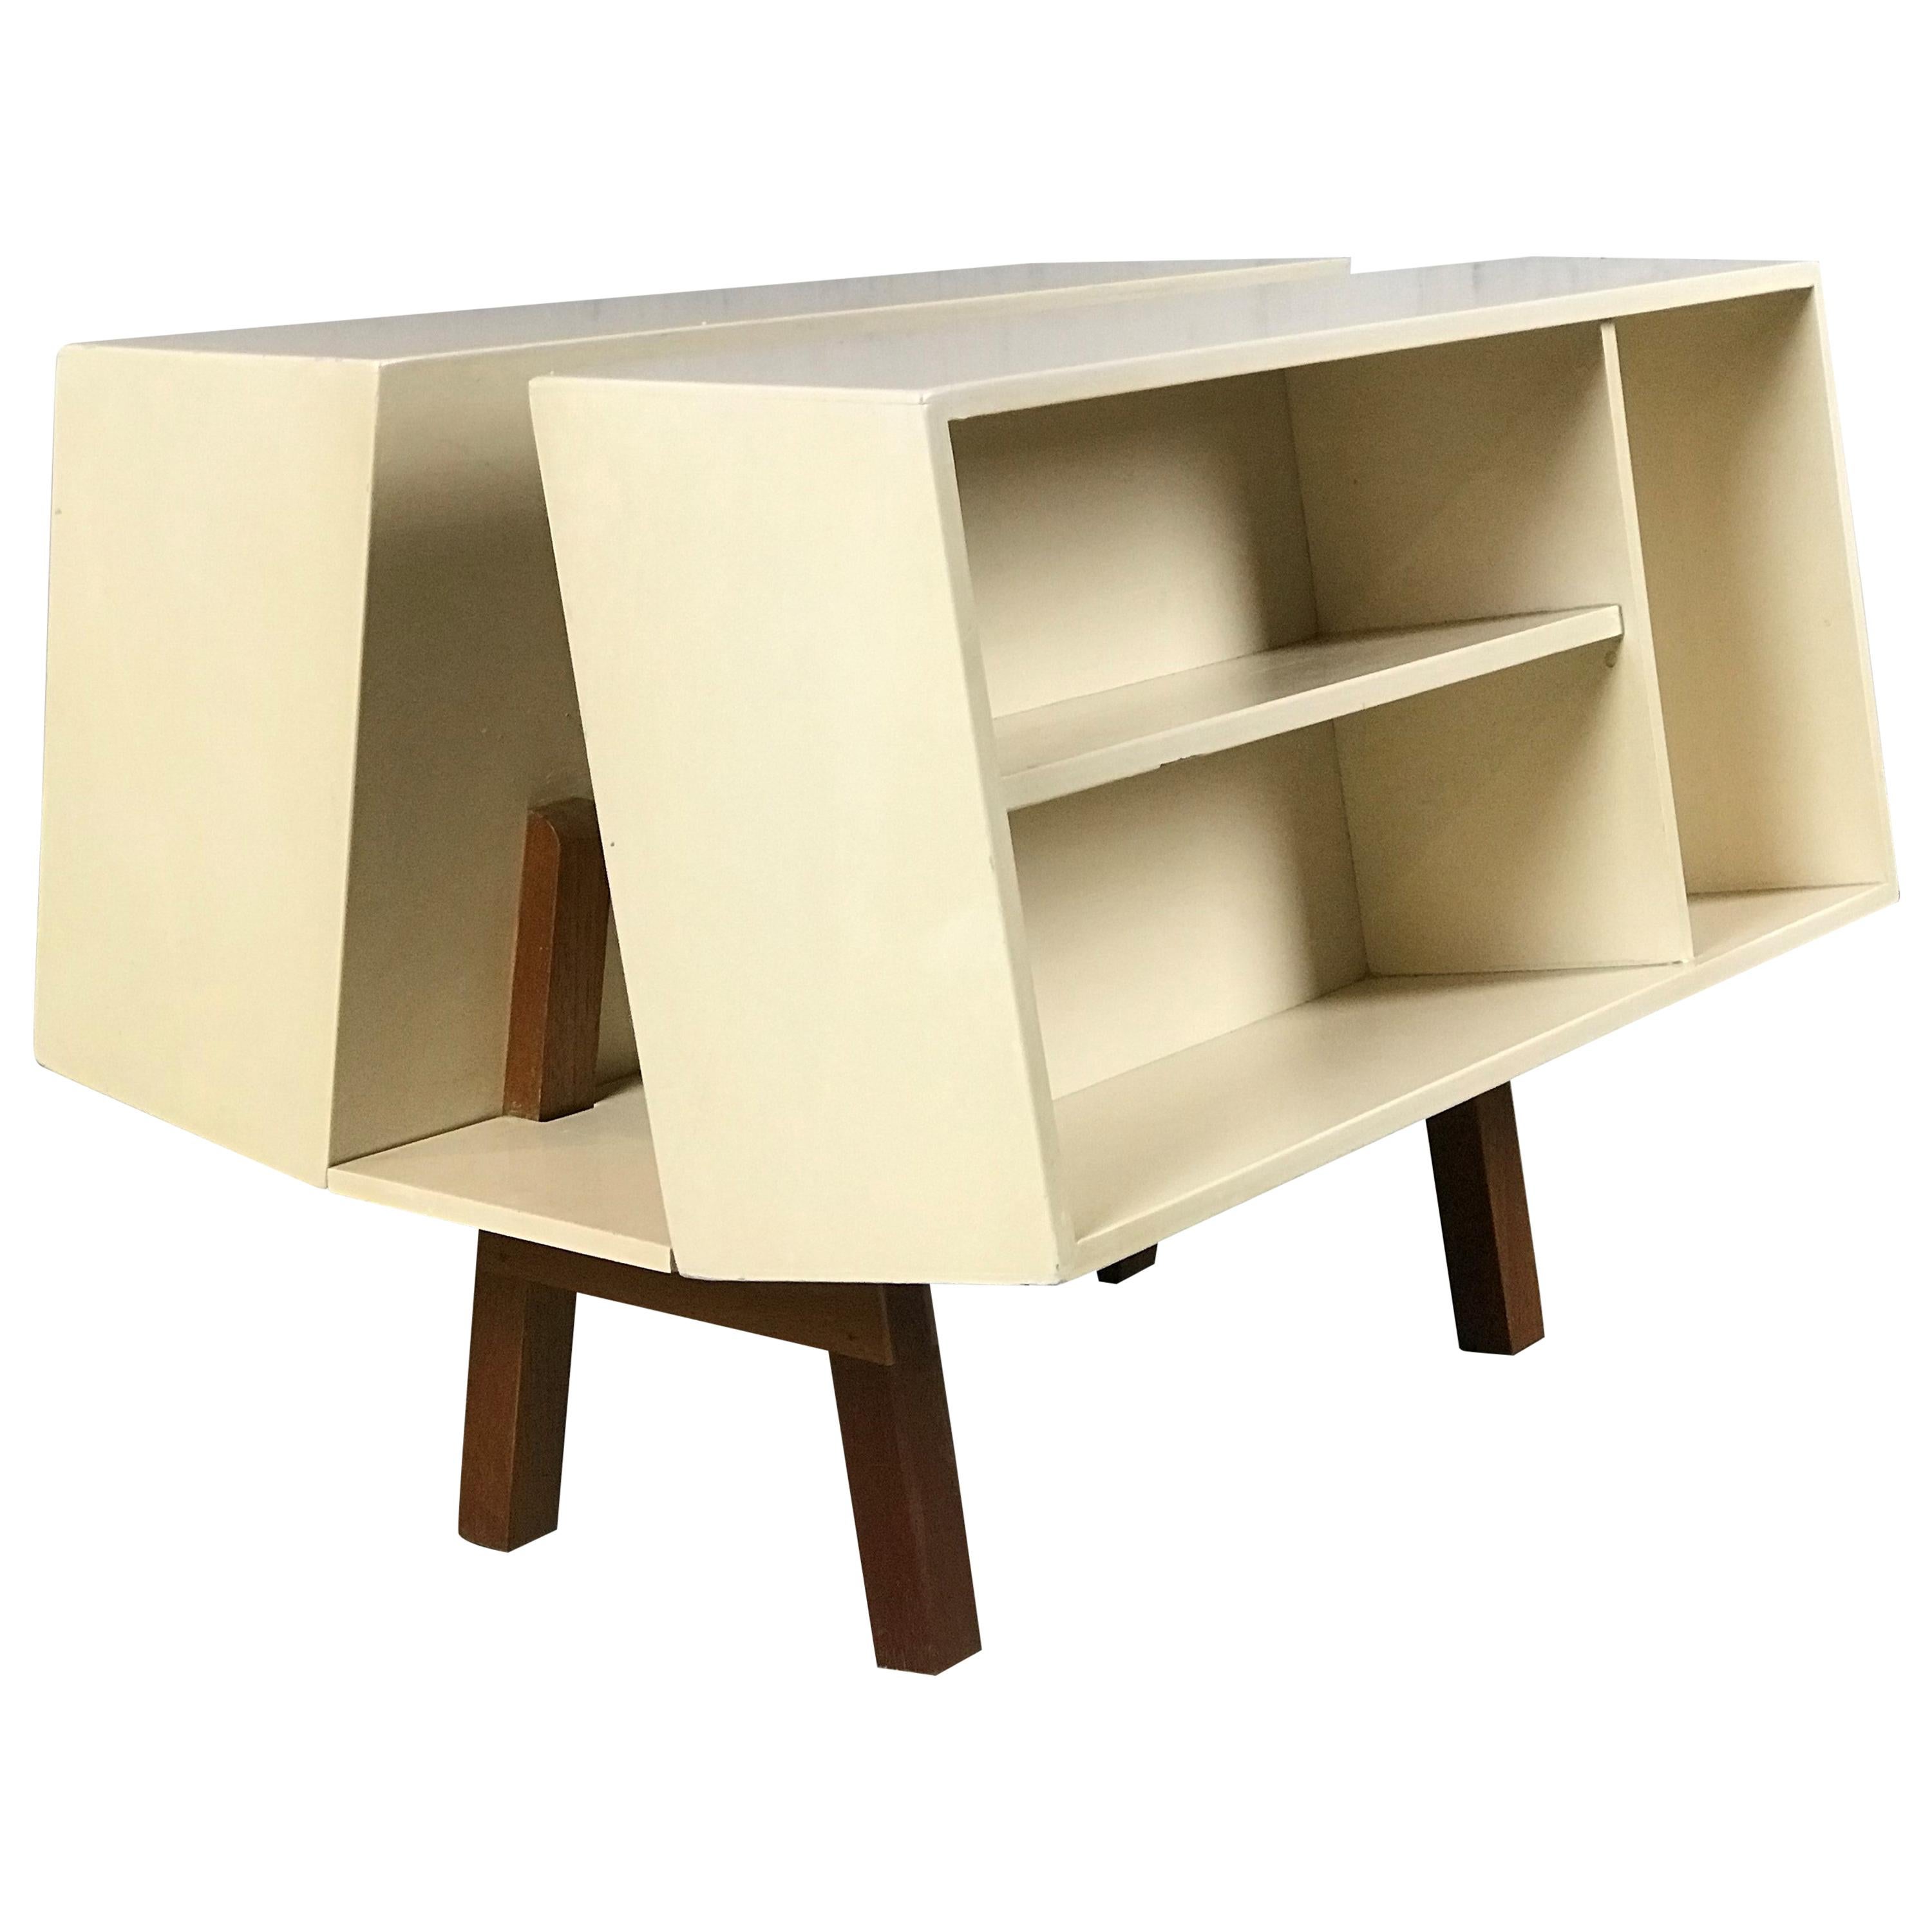 Penguin Donkey Mark II Petite Bookcase Table by Ernest Race for Isokon, 1963